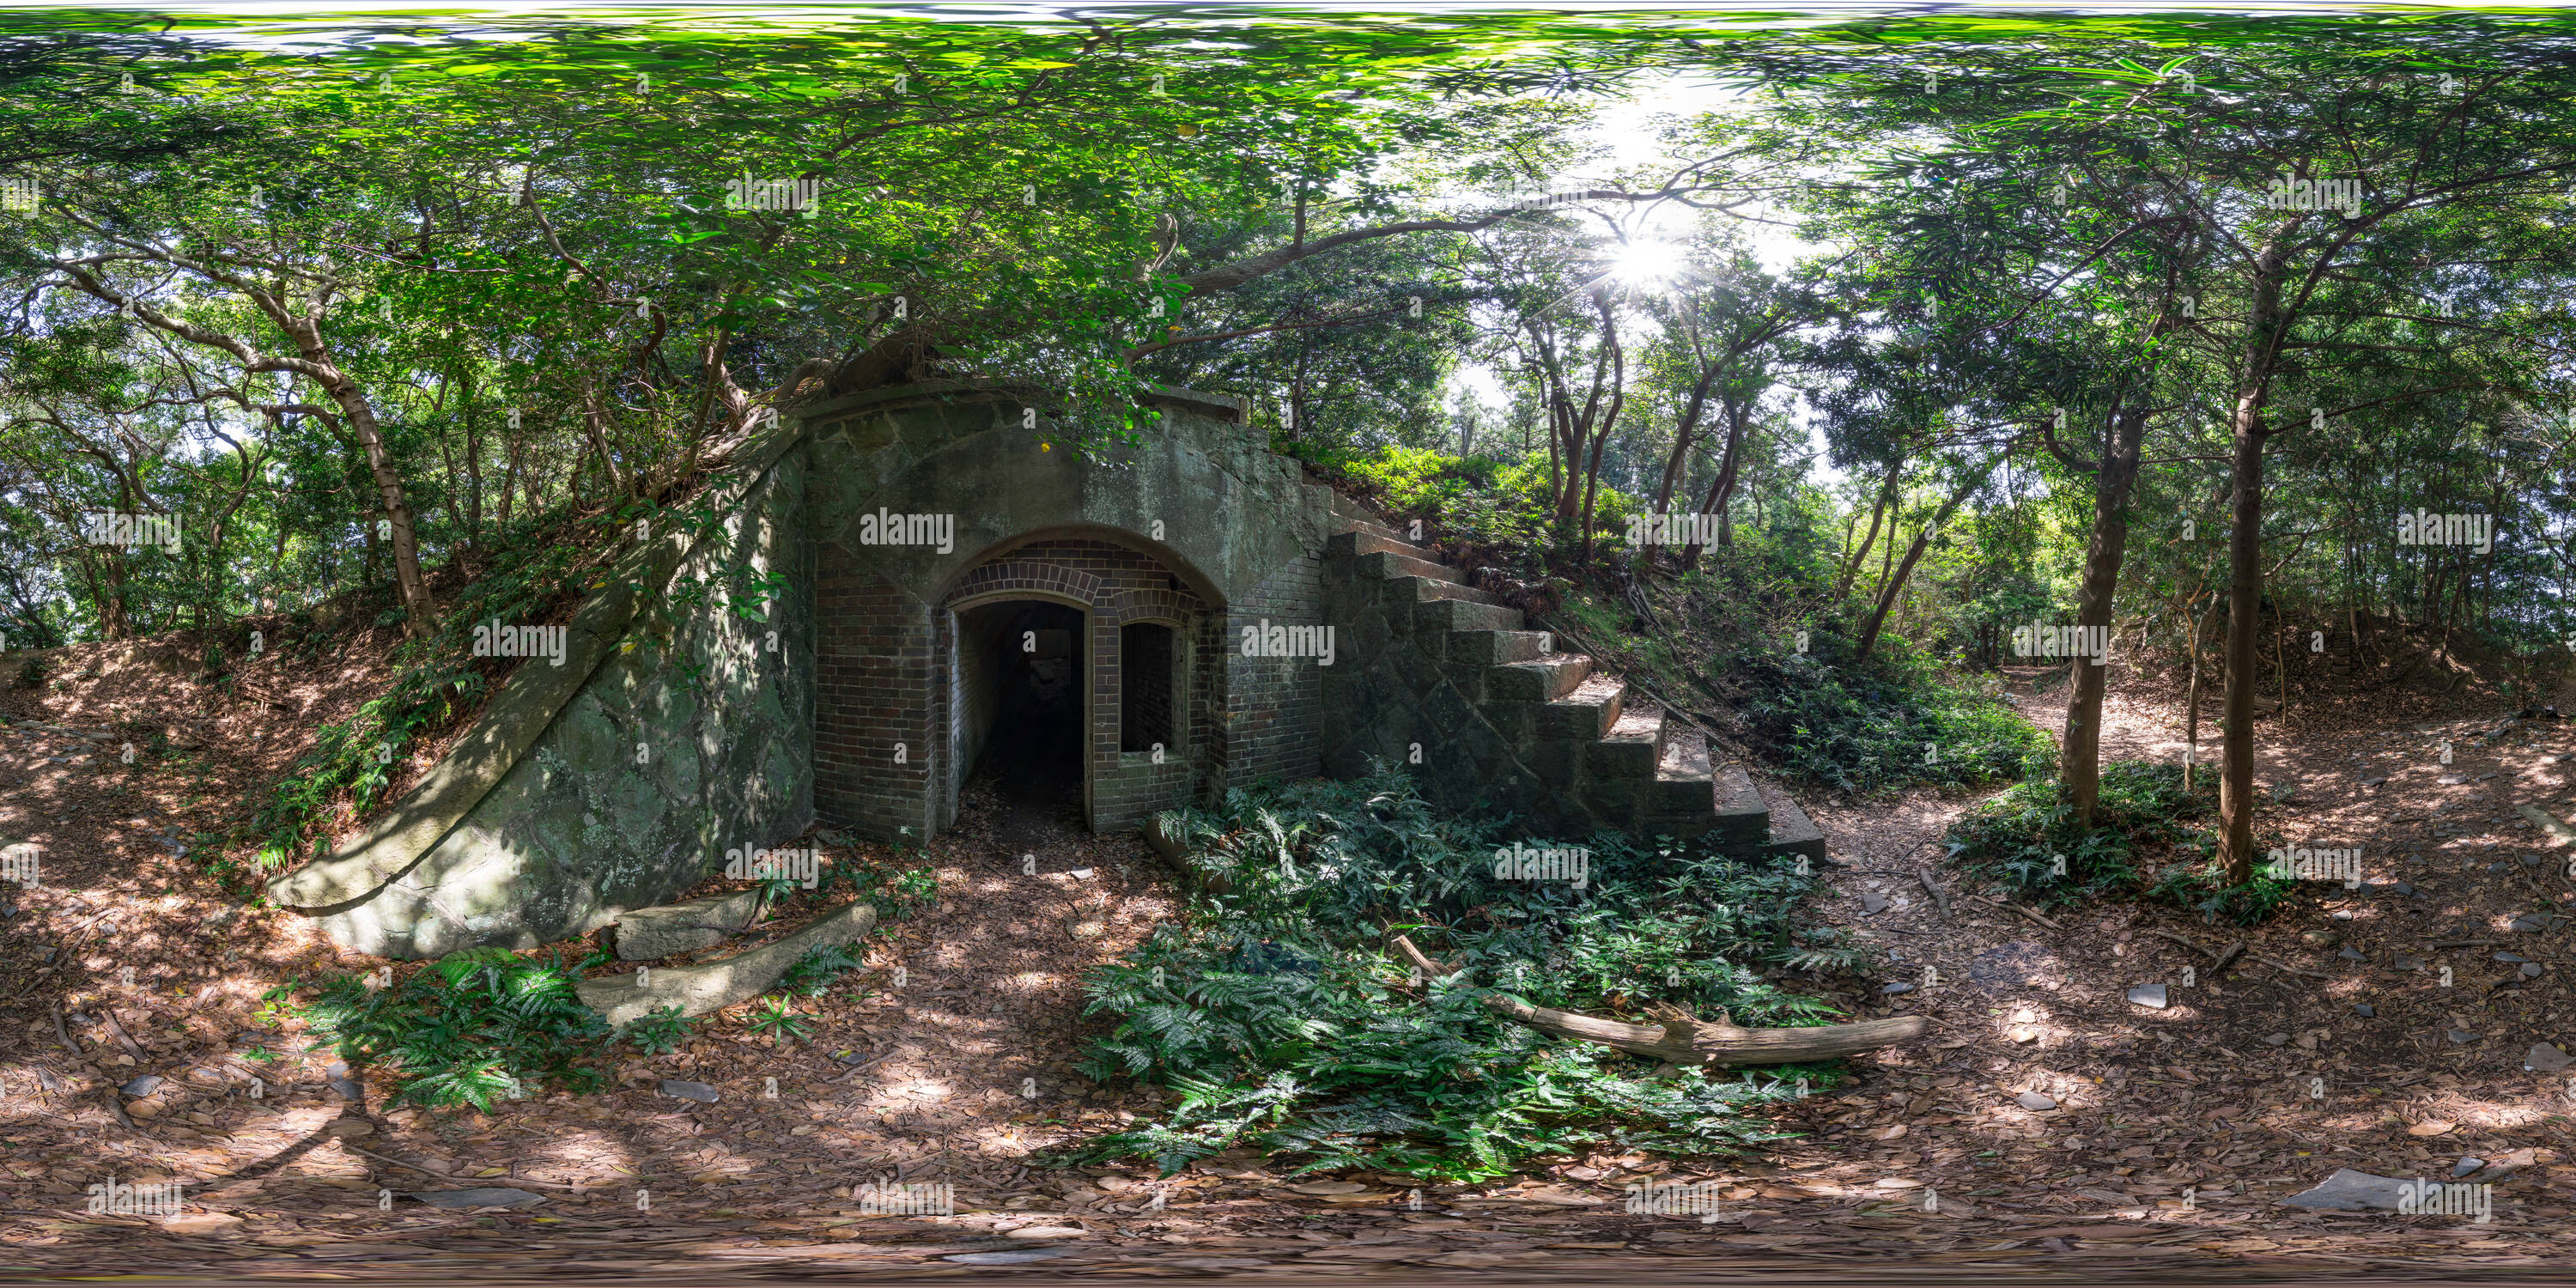 360 degree panoramic view of The ruins of the Japanese troops fort in Tomogashima Island, Japan 09